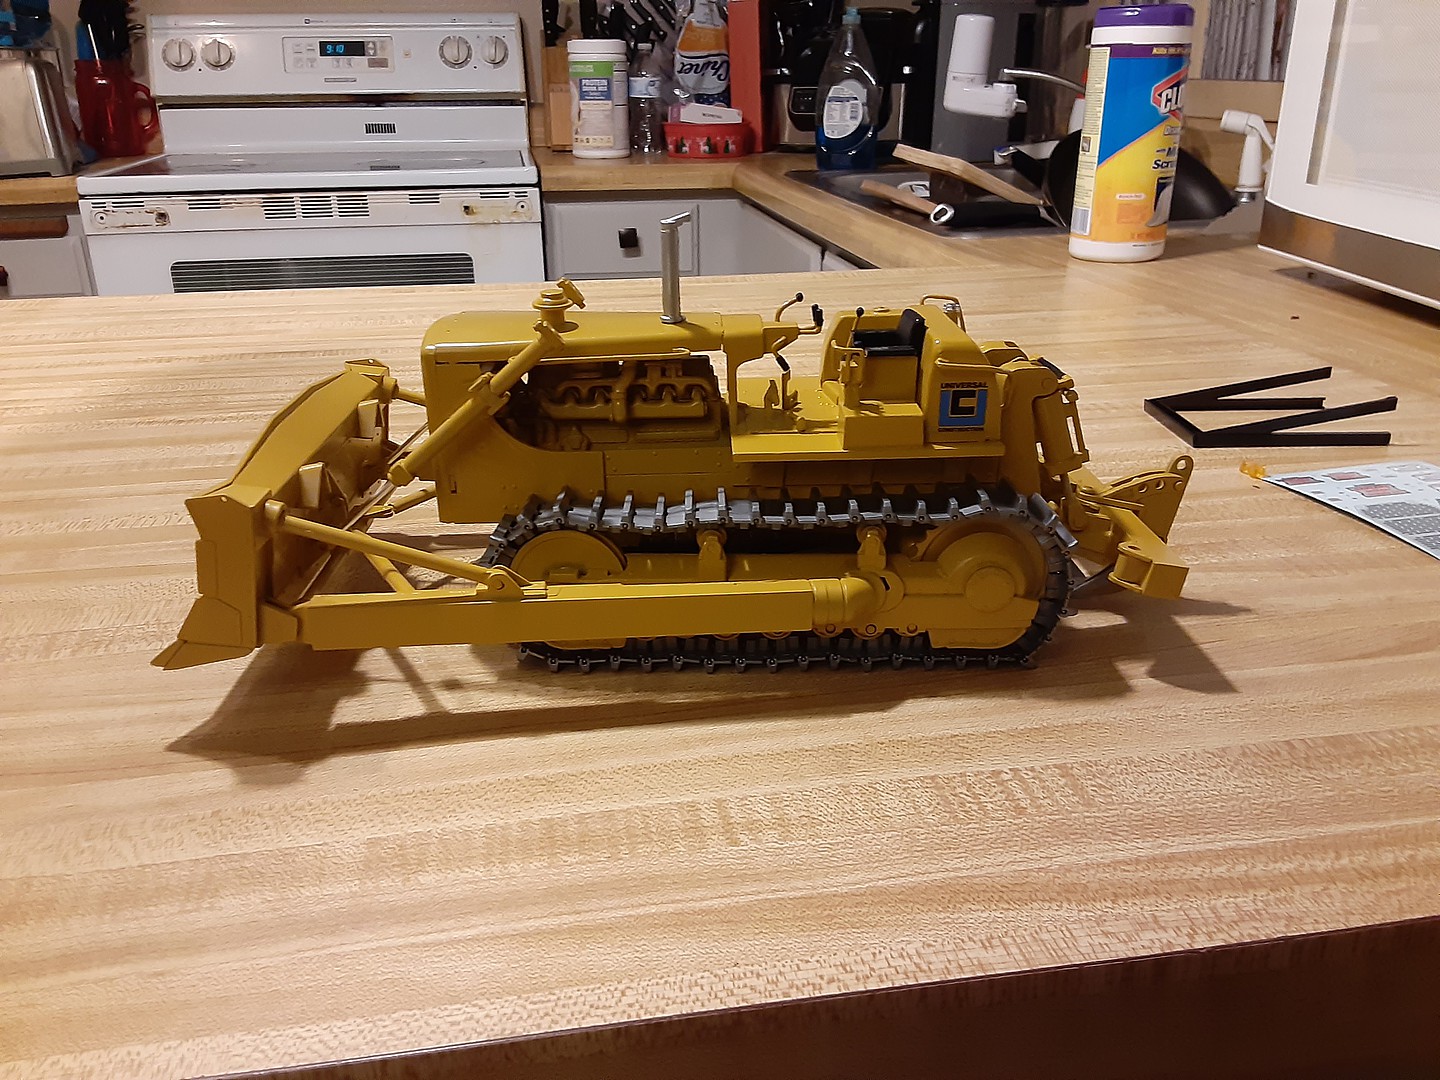 Details about   AMT Construction Bulldozer 1/25 Scale Plastic Model Kit 1086/06 New Sealed 